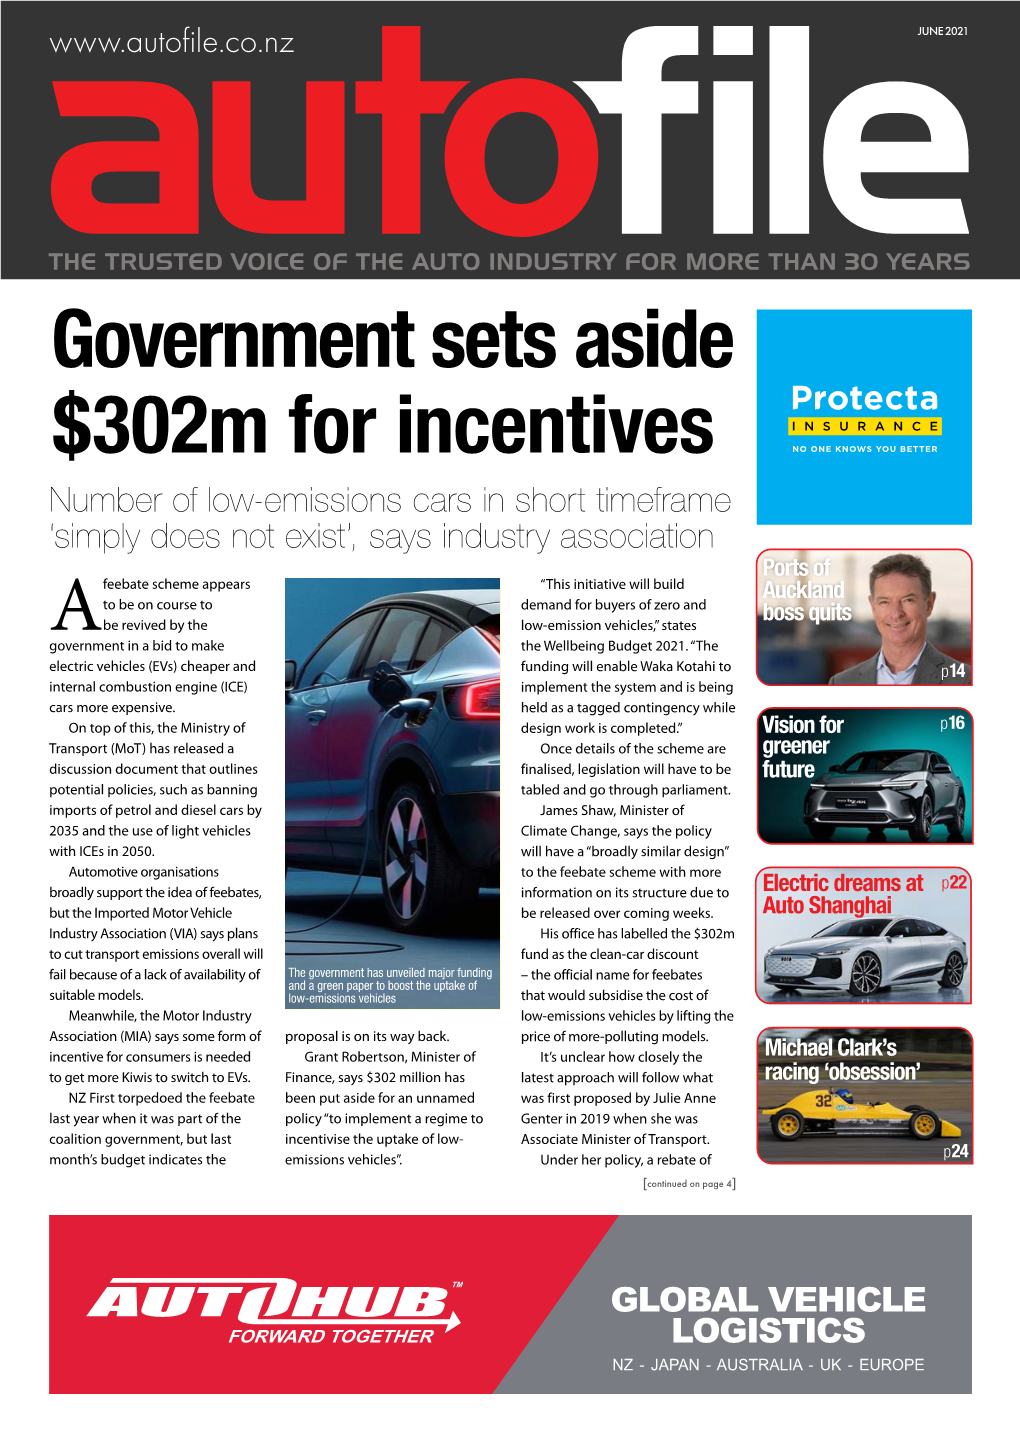 Government Sets Aside $302M for Incentives